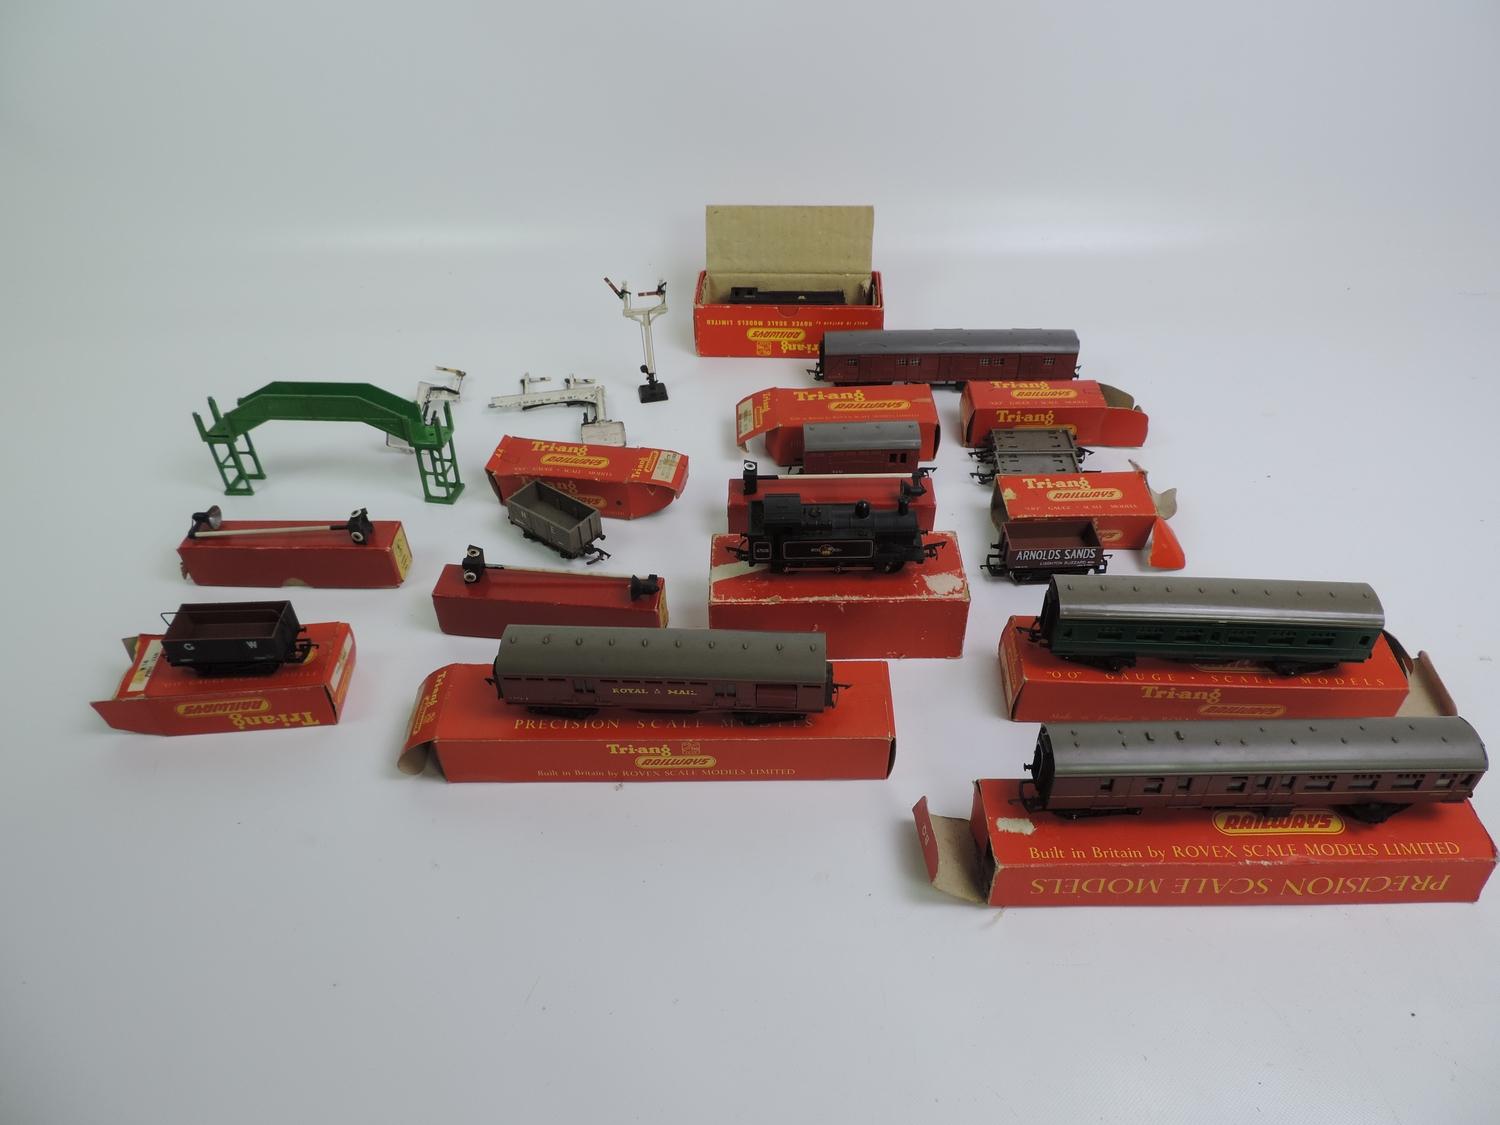 Quantity of Triang Railway Model Items